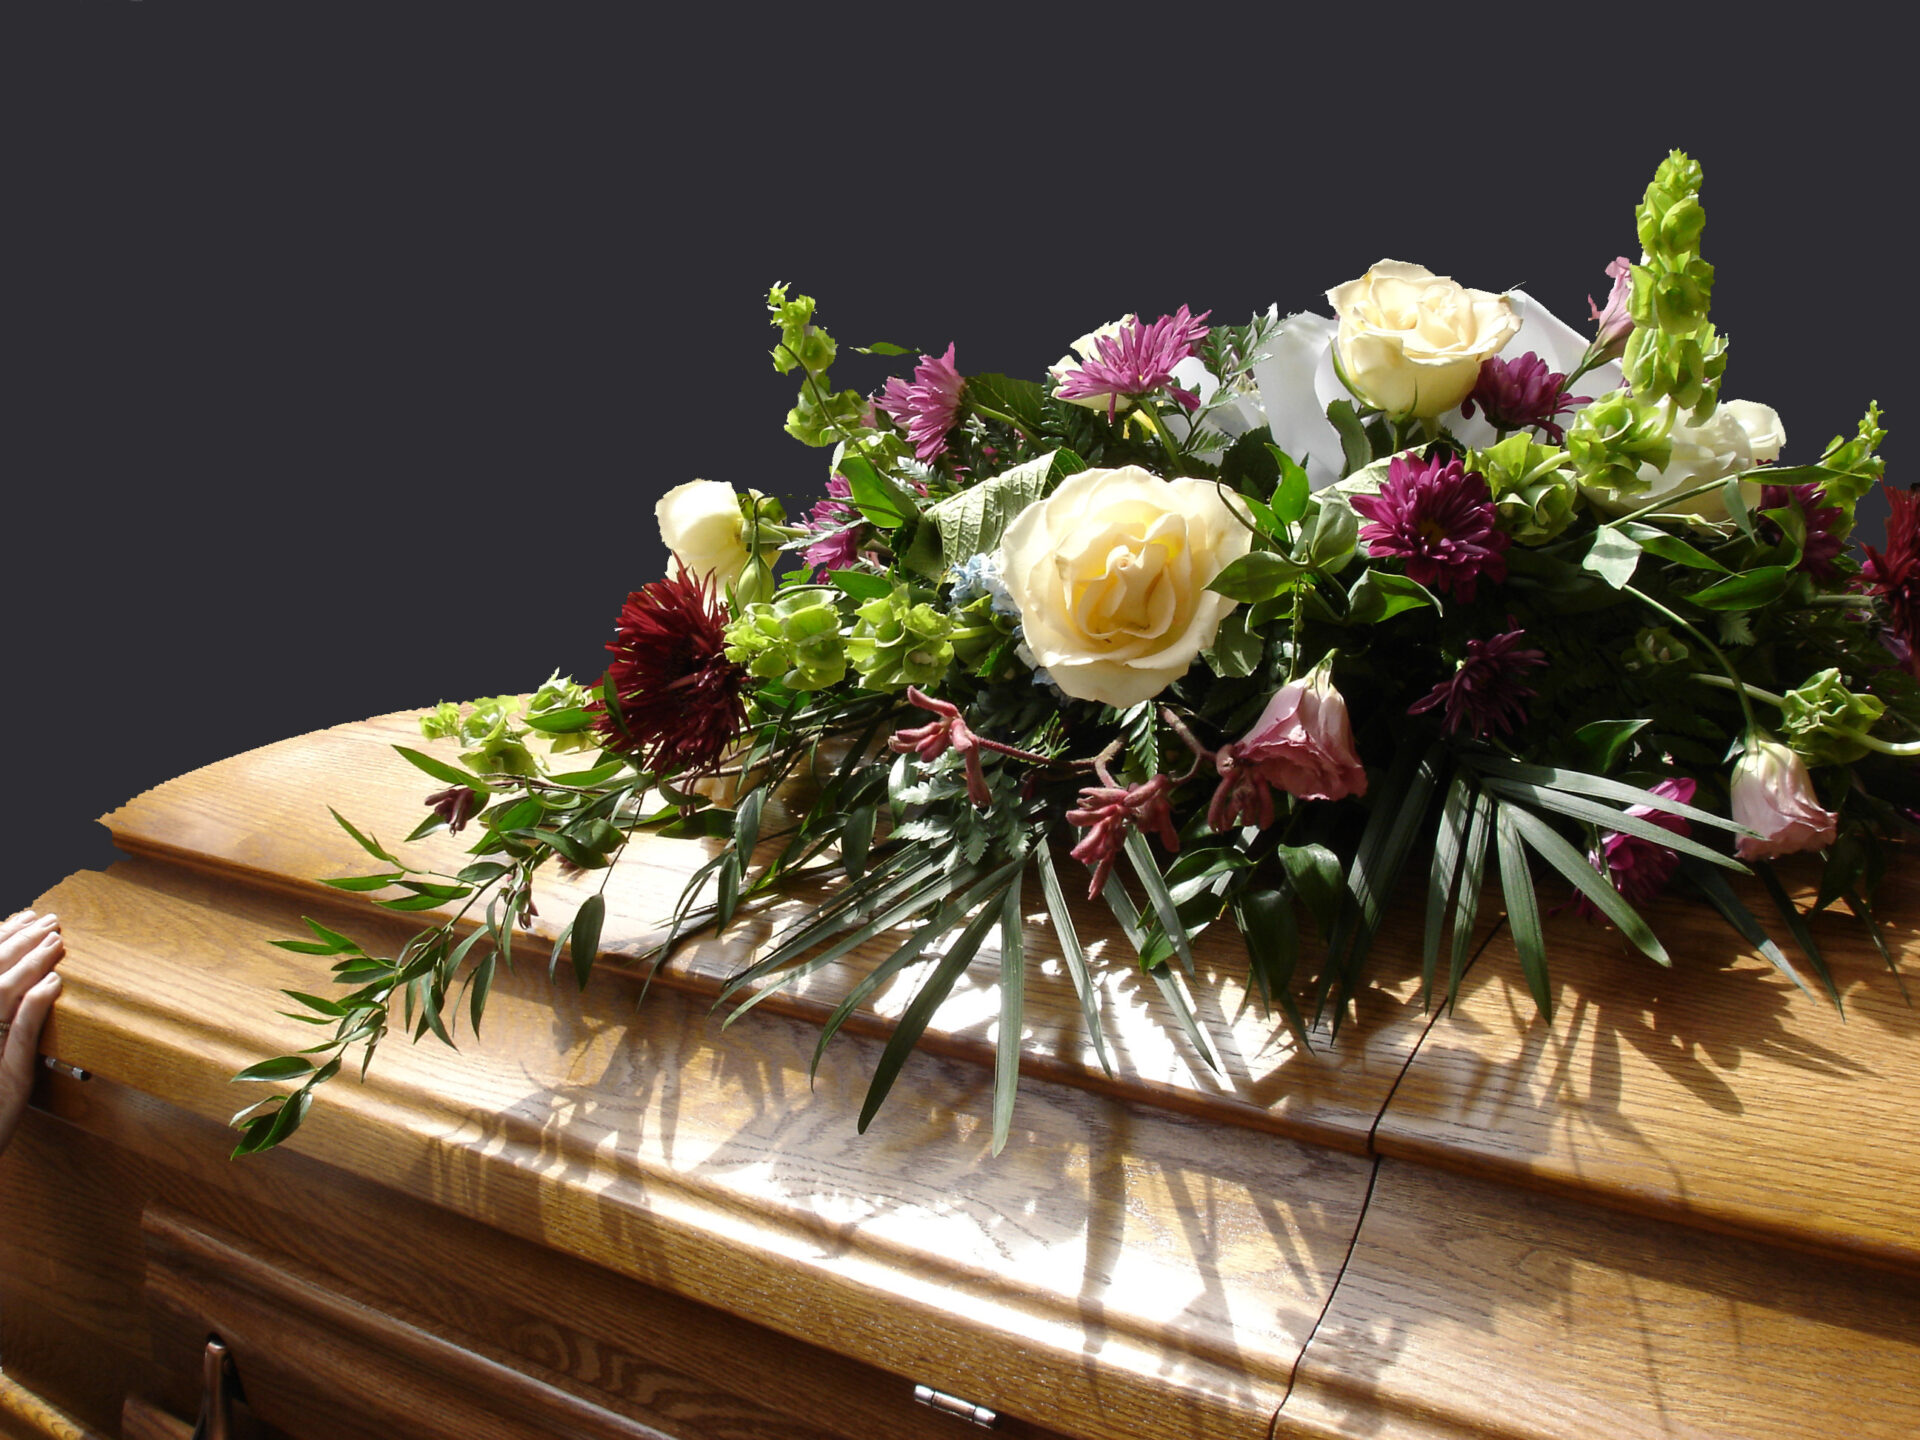 Online Obituary Scam Targets Most Vulnerable